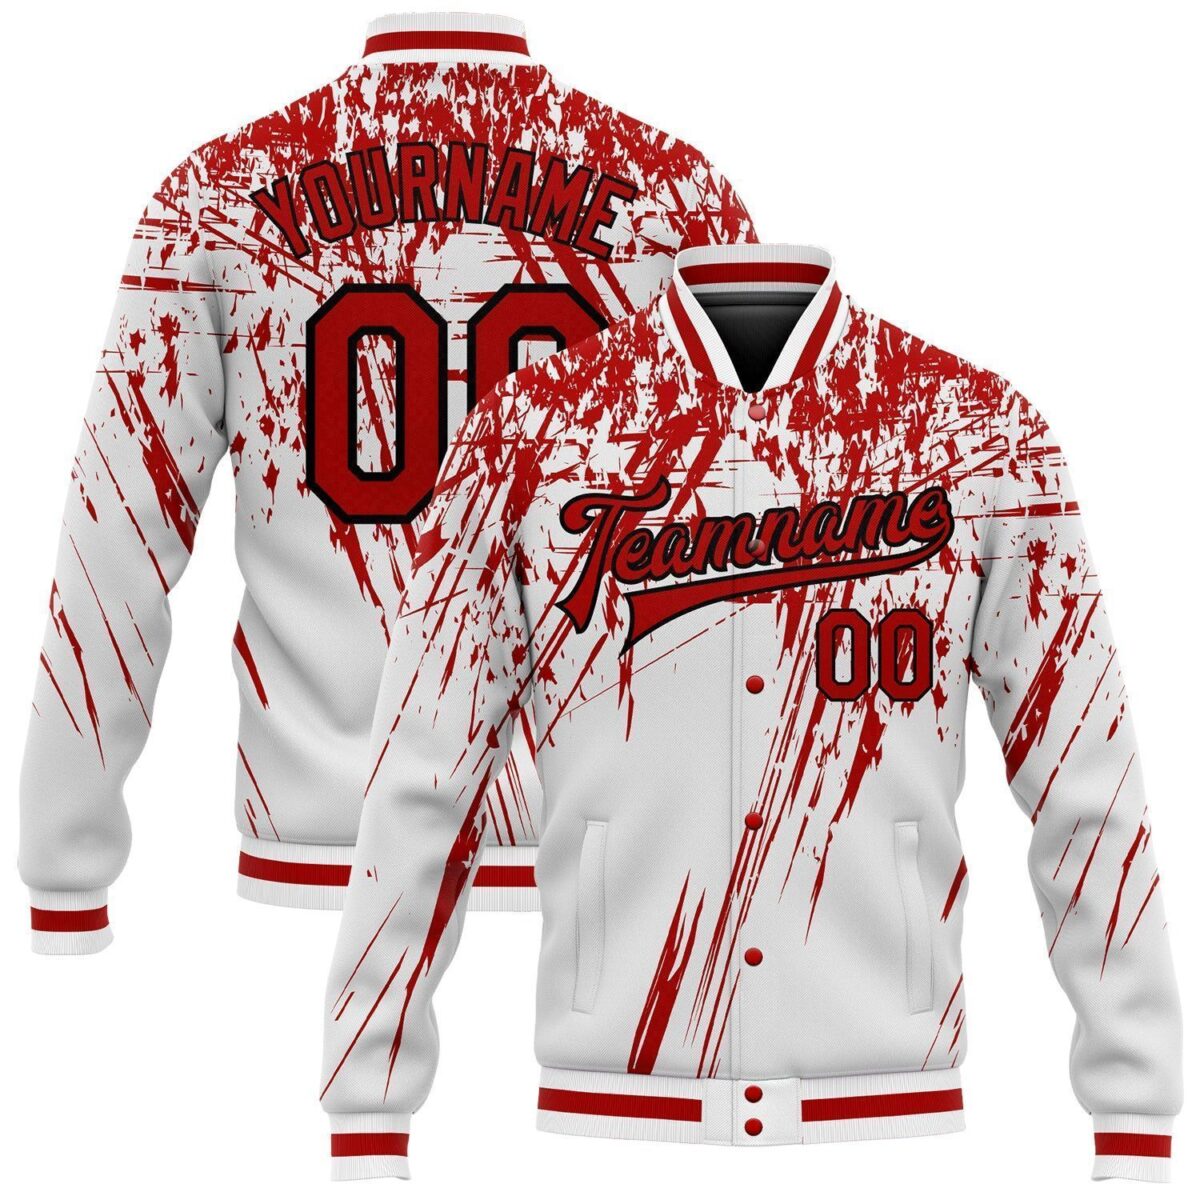 College Student Baseball Jackets with White & Red Design 1